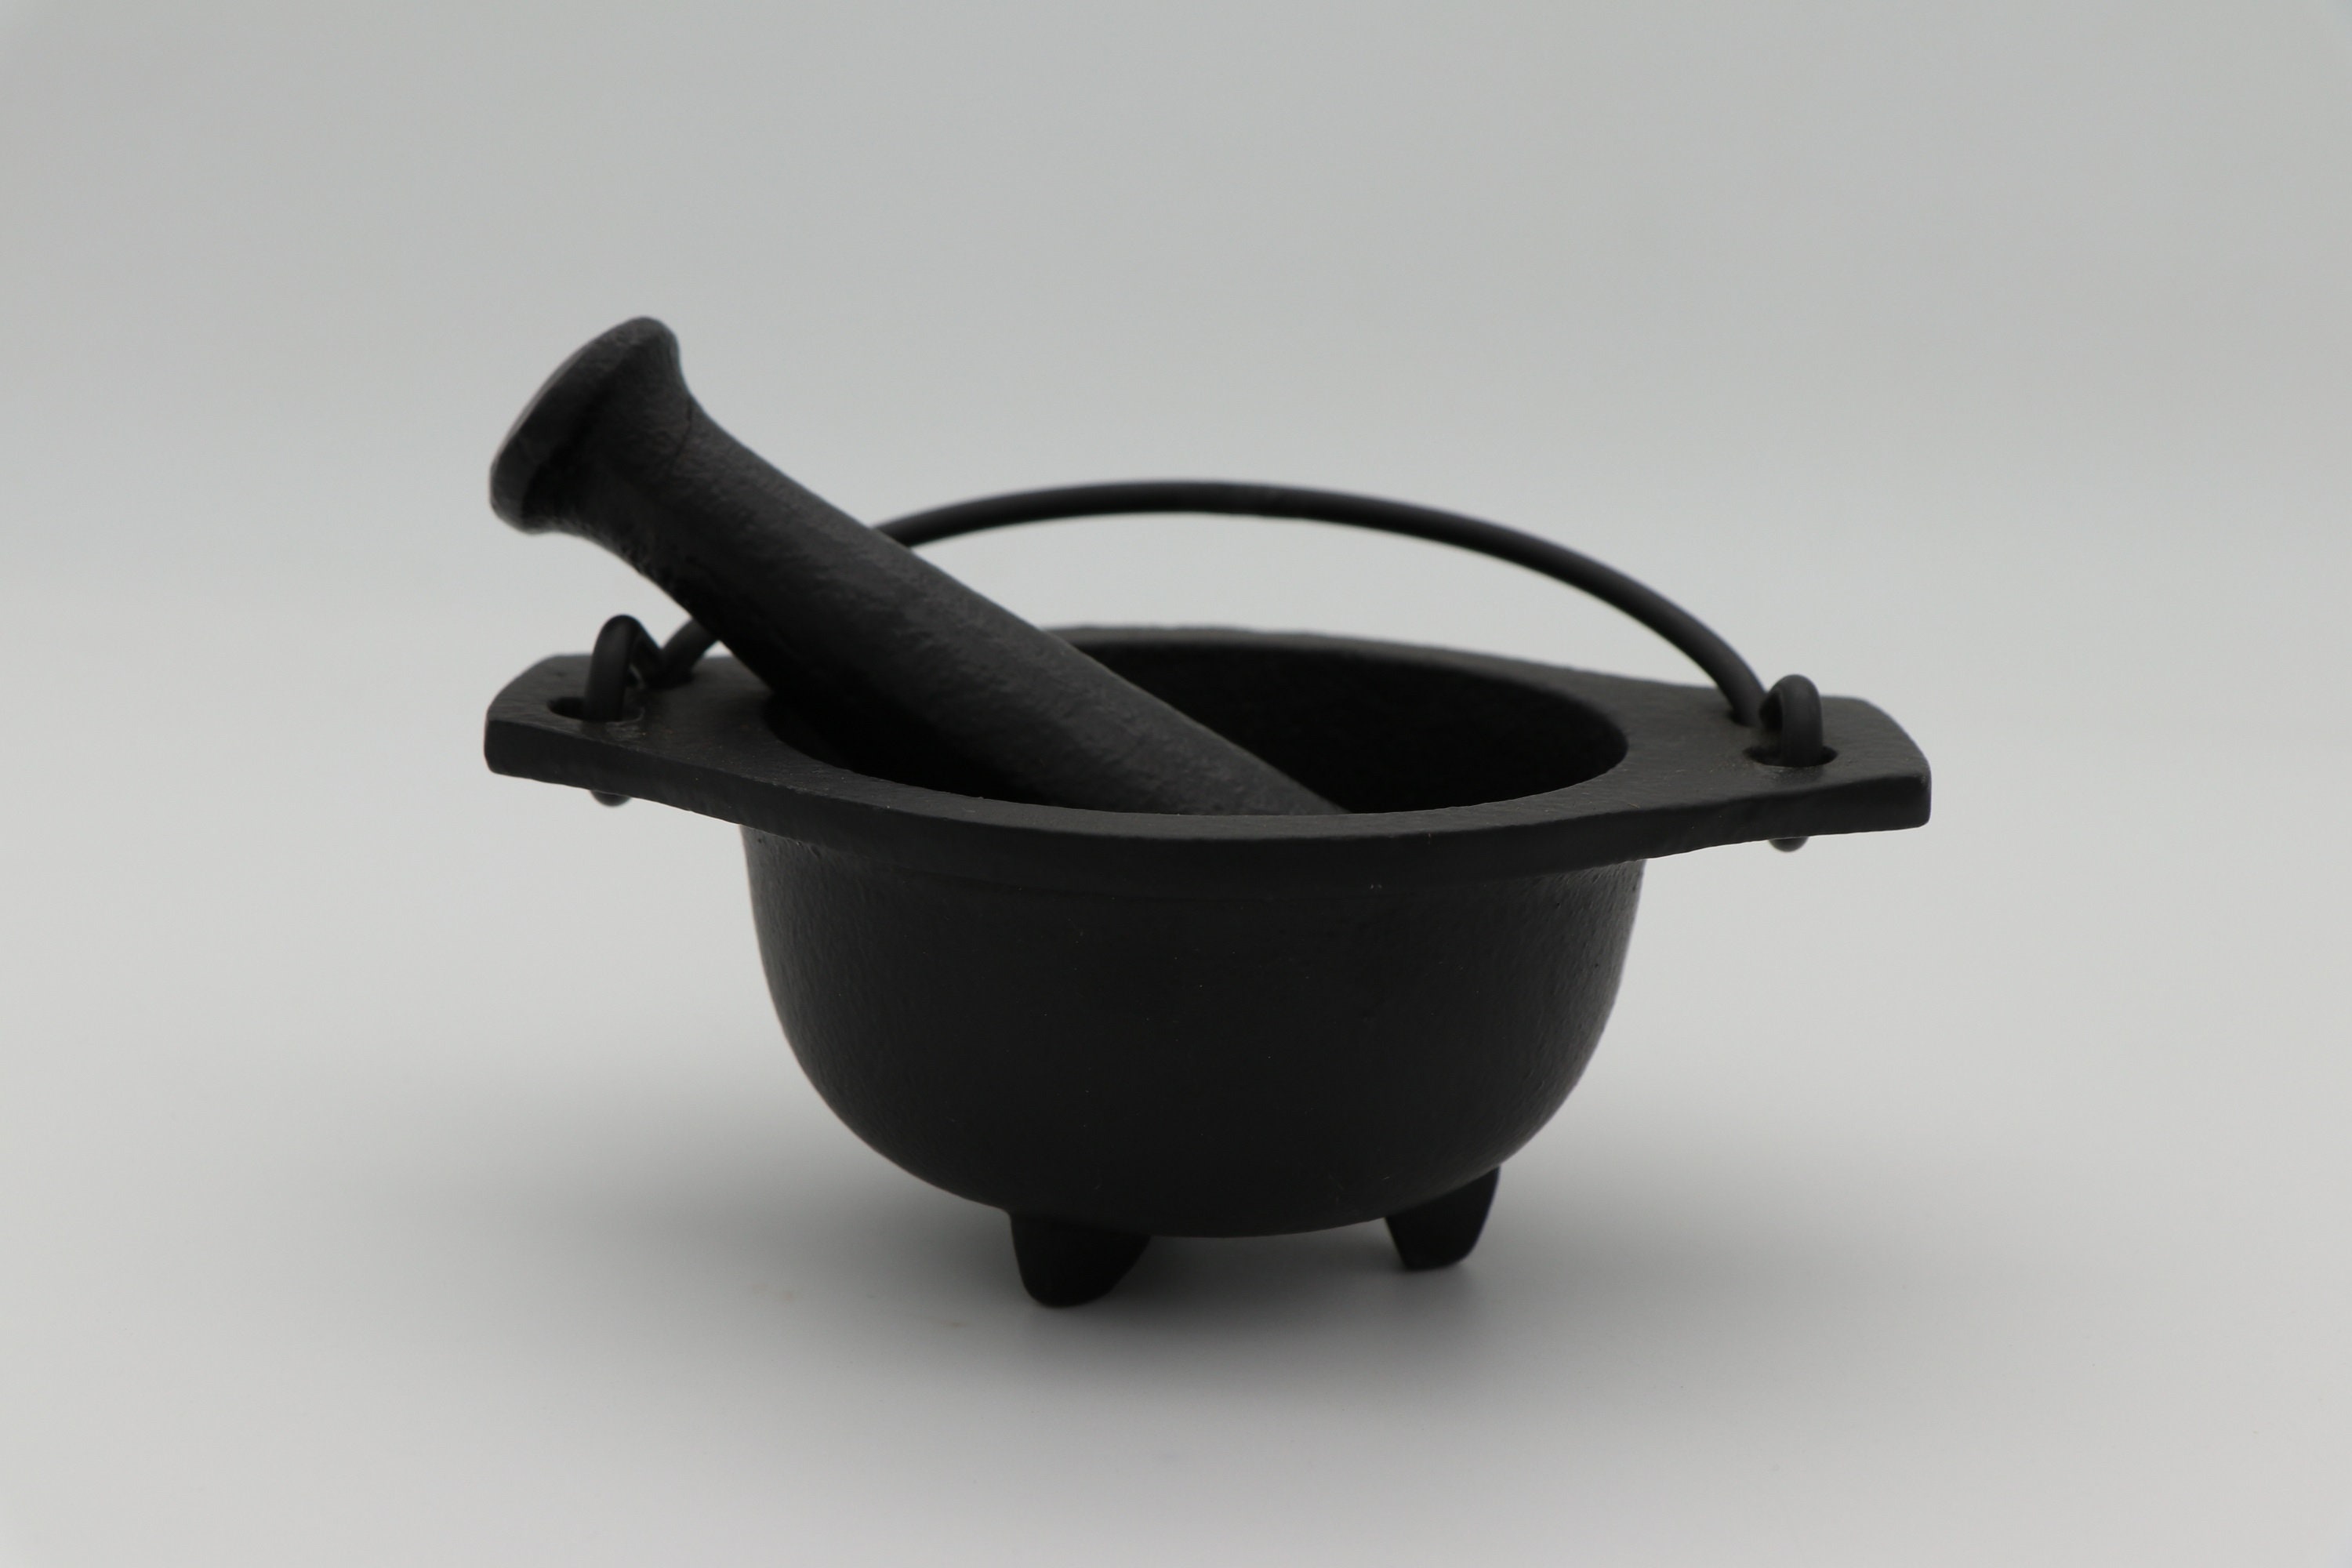 Backcountry Iron 6.25 Inch Heavy Cast Iron Pestle for Grinding and